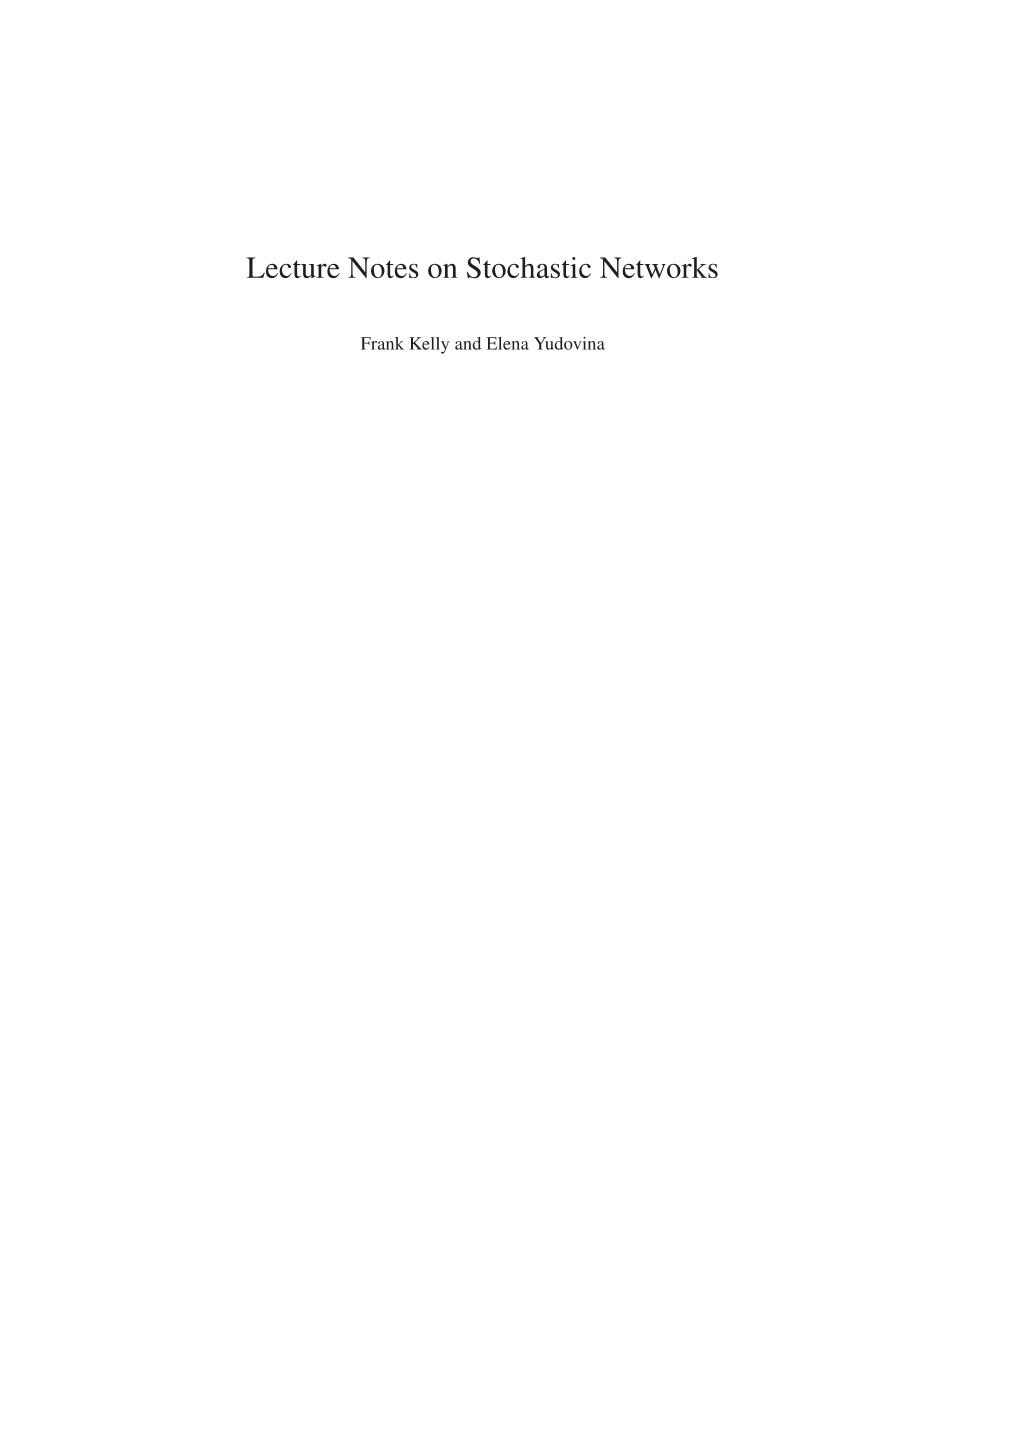 Lecture Notes on Stochastic Networks